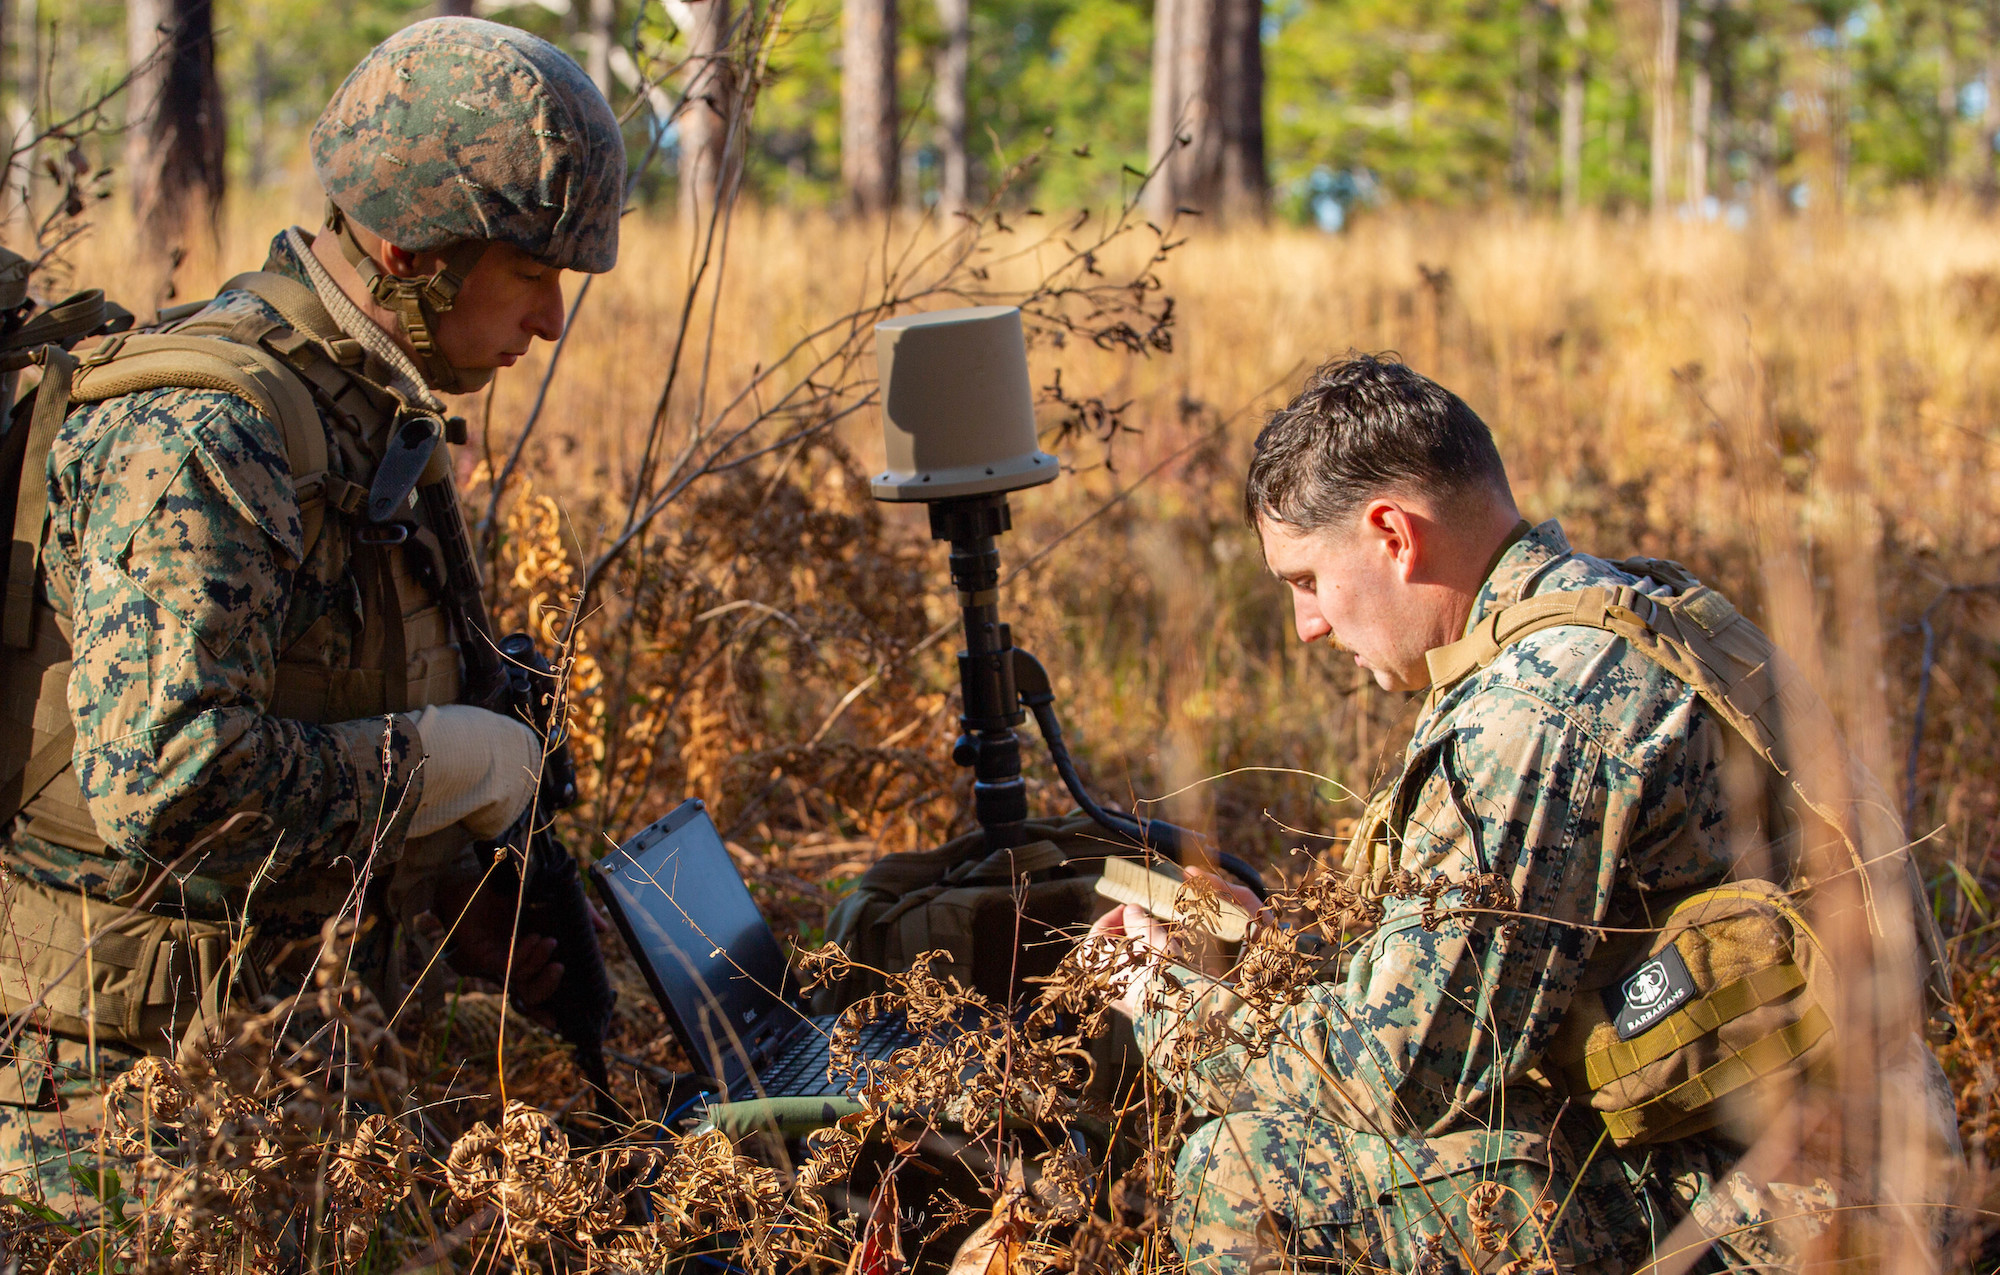 The US could get a peek into Russia’s electronic warfare secrets thanks to Ukraine